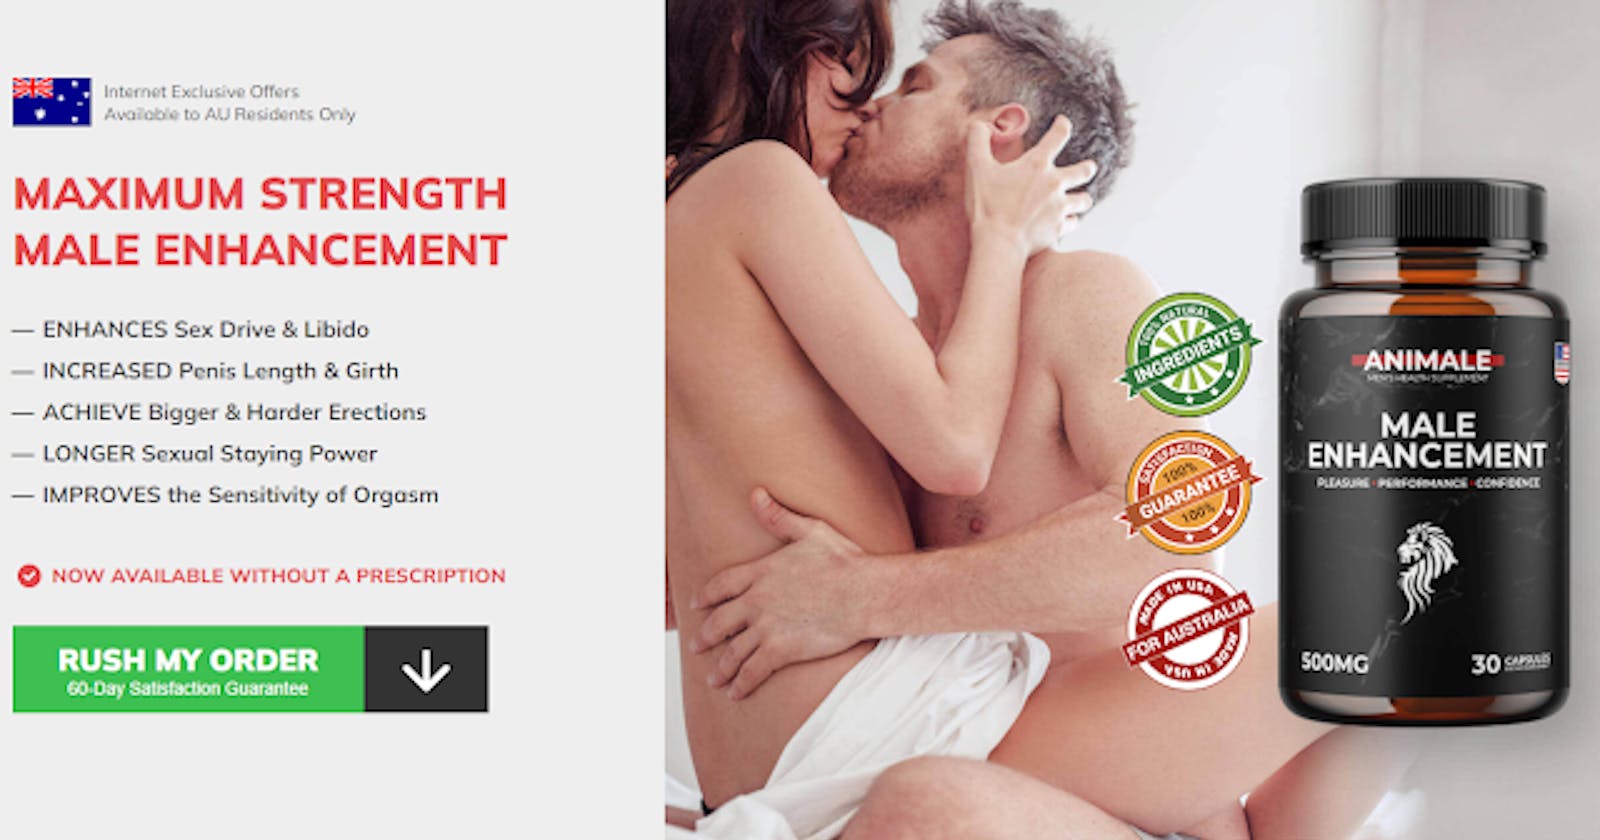 Animale Male Enhancement South Africa Reviews - Is It  Legit Or Fake? Animale Male Enhancement Reviews!